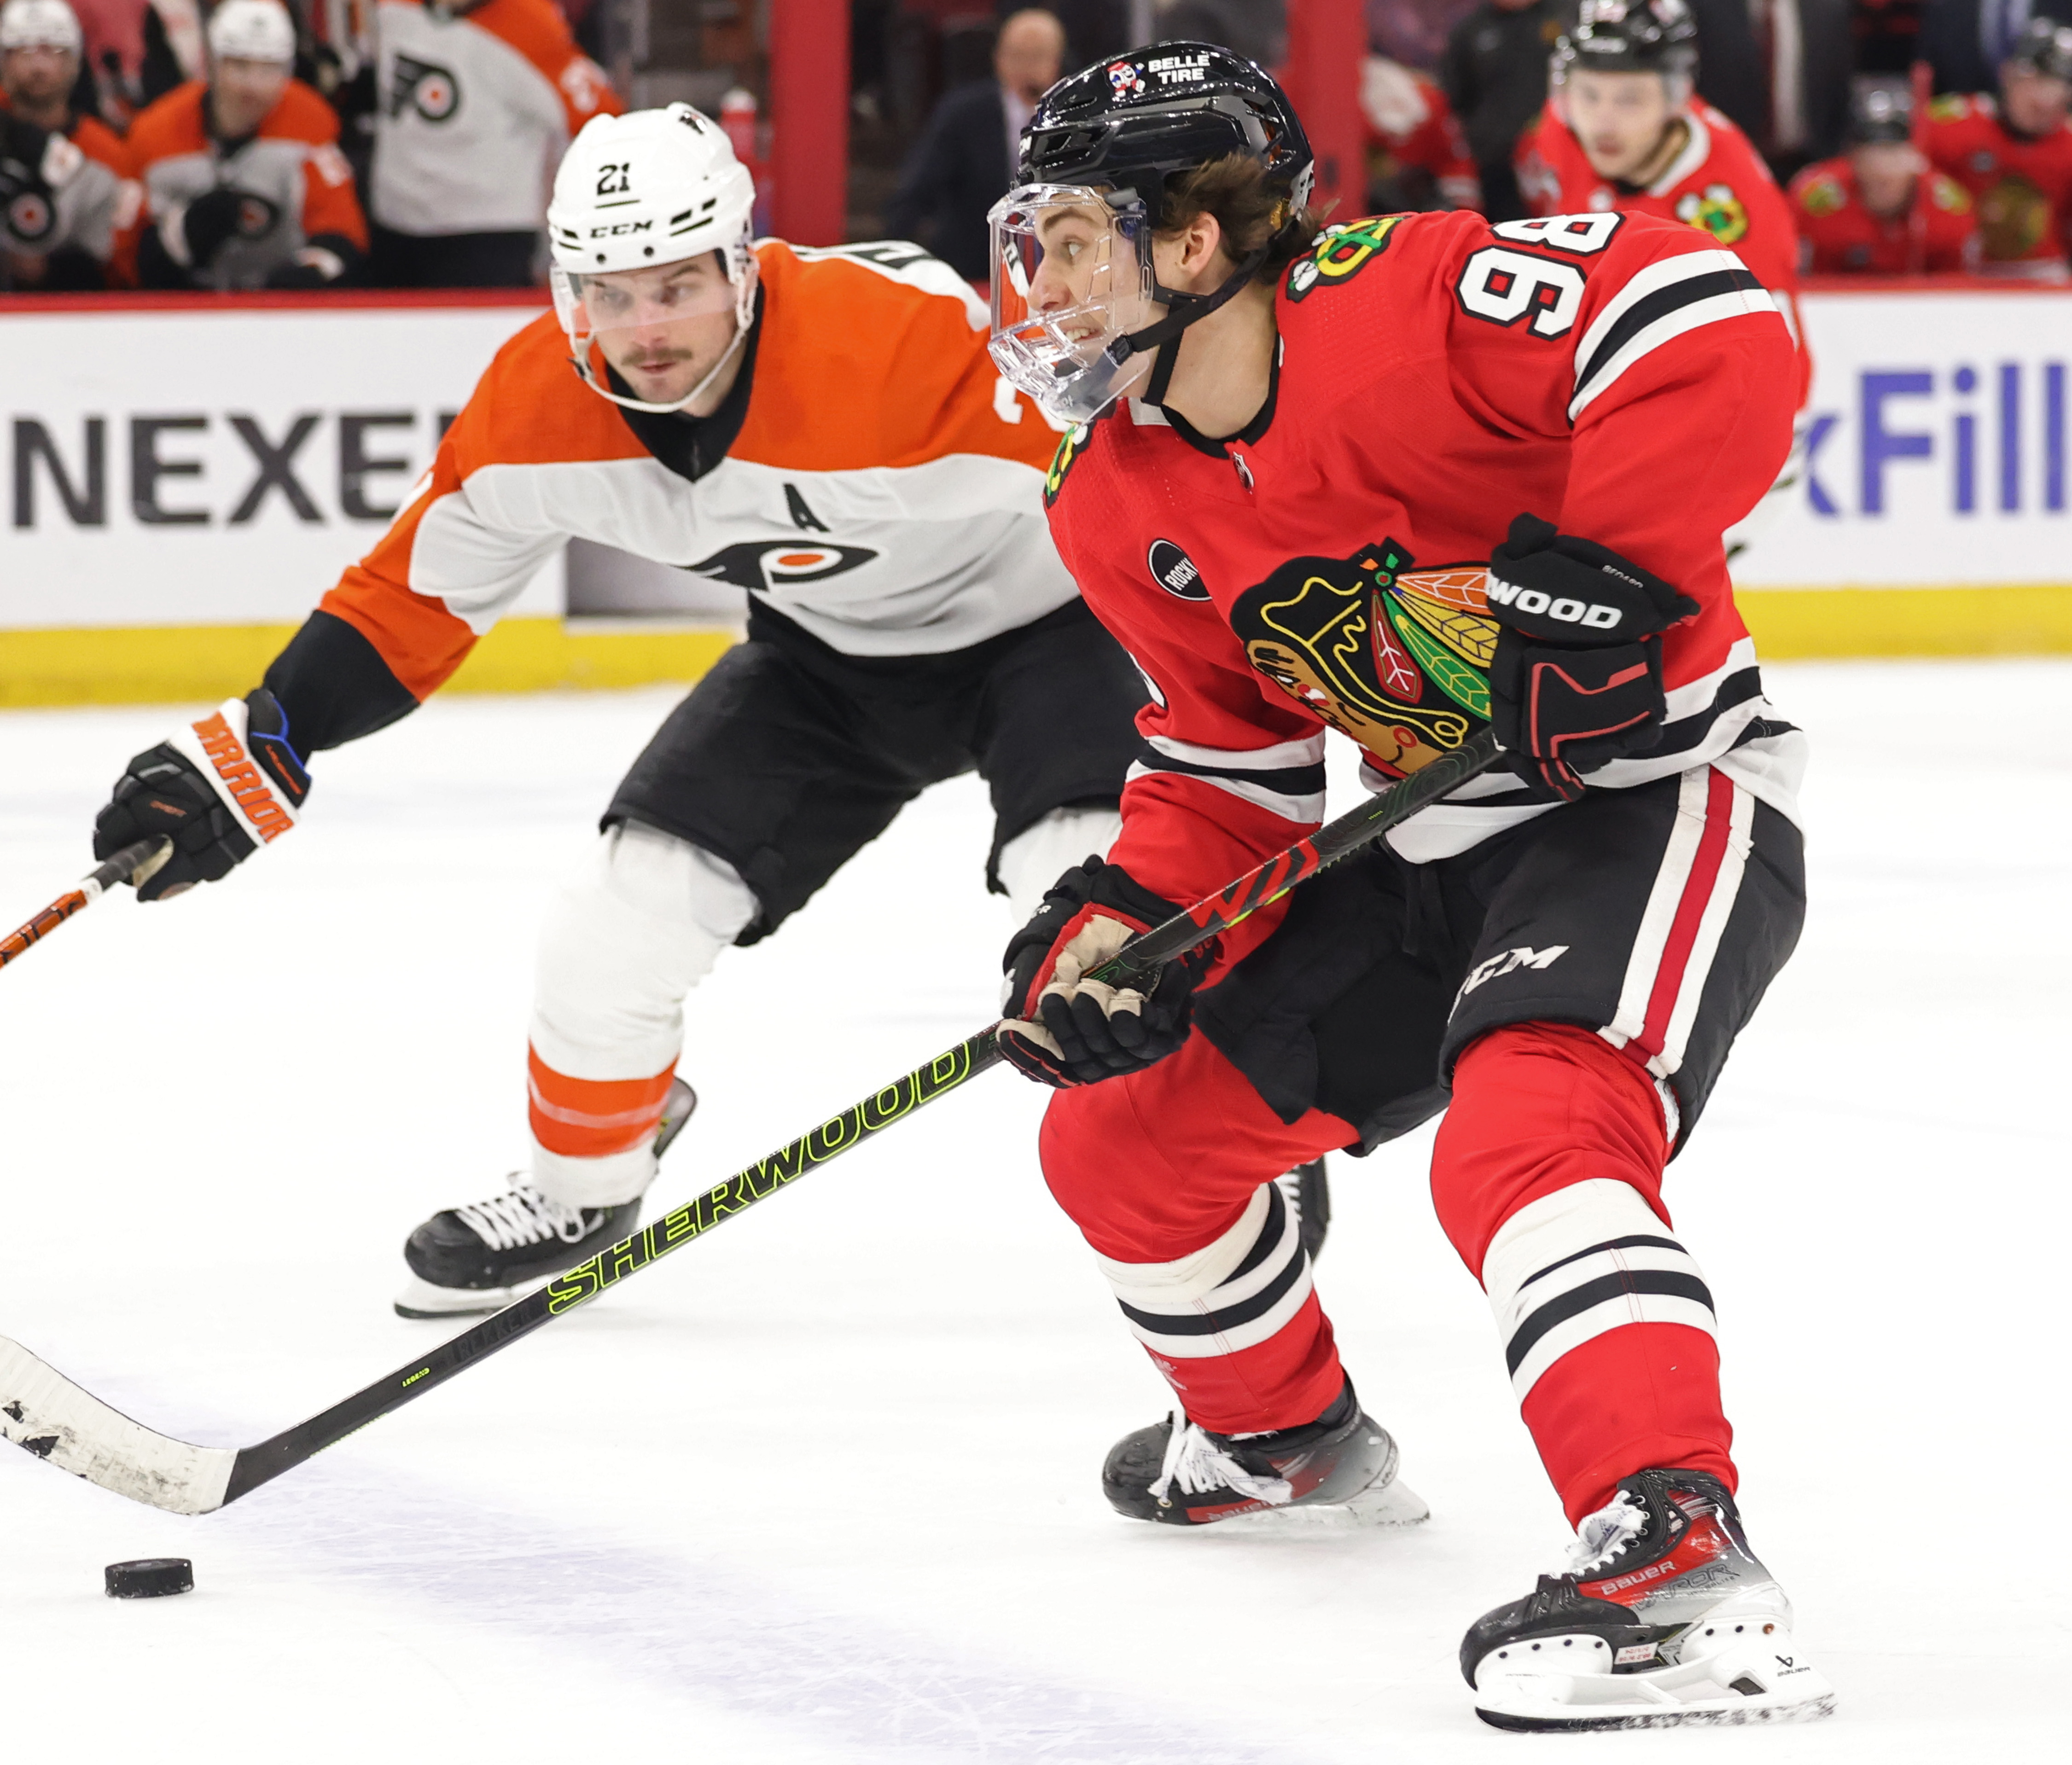 Blackhawks center Connor Bedard (98) advances the puck as Flyers center Scott Laughton (21) defends during the third period at the United Center in Chicago on February 21, 2024.  (John J. Kim/Chicago Tribune)